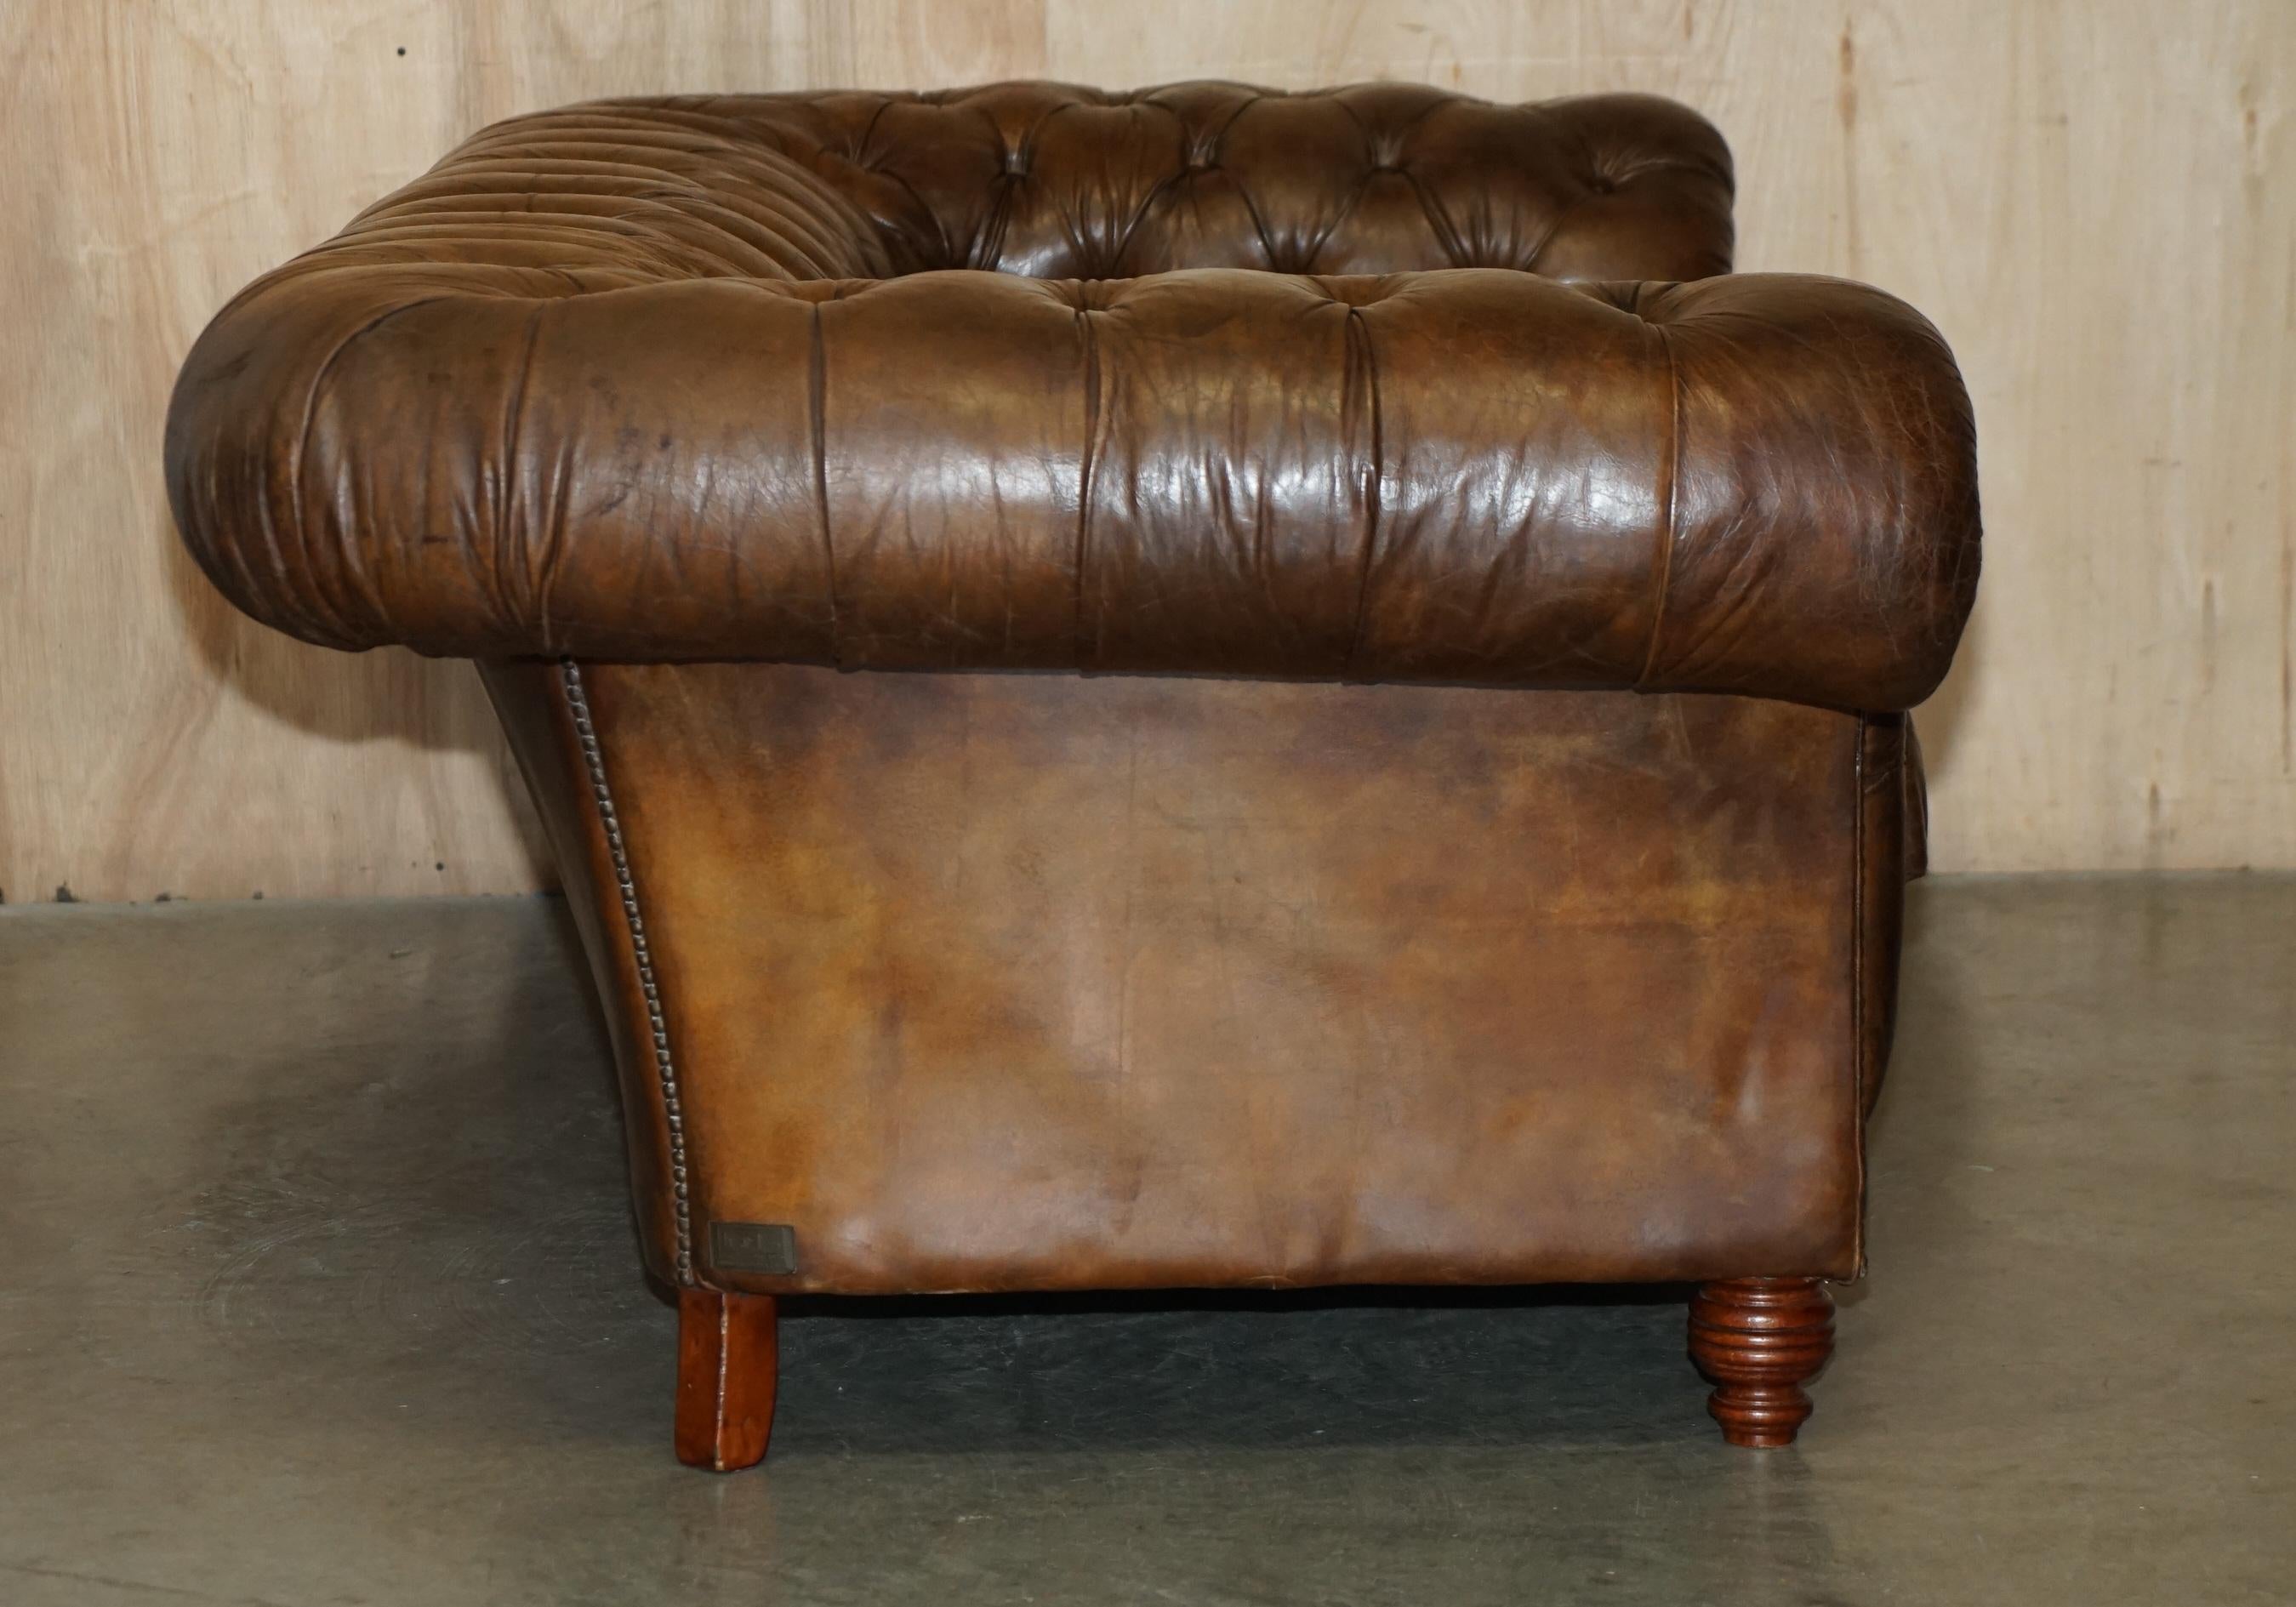 1 DE 2 SOFAS TIMOTHY OULTON HERITAGE BROWN OVERSIZED LEATHER CHESTERFIELD HALO en vente 4